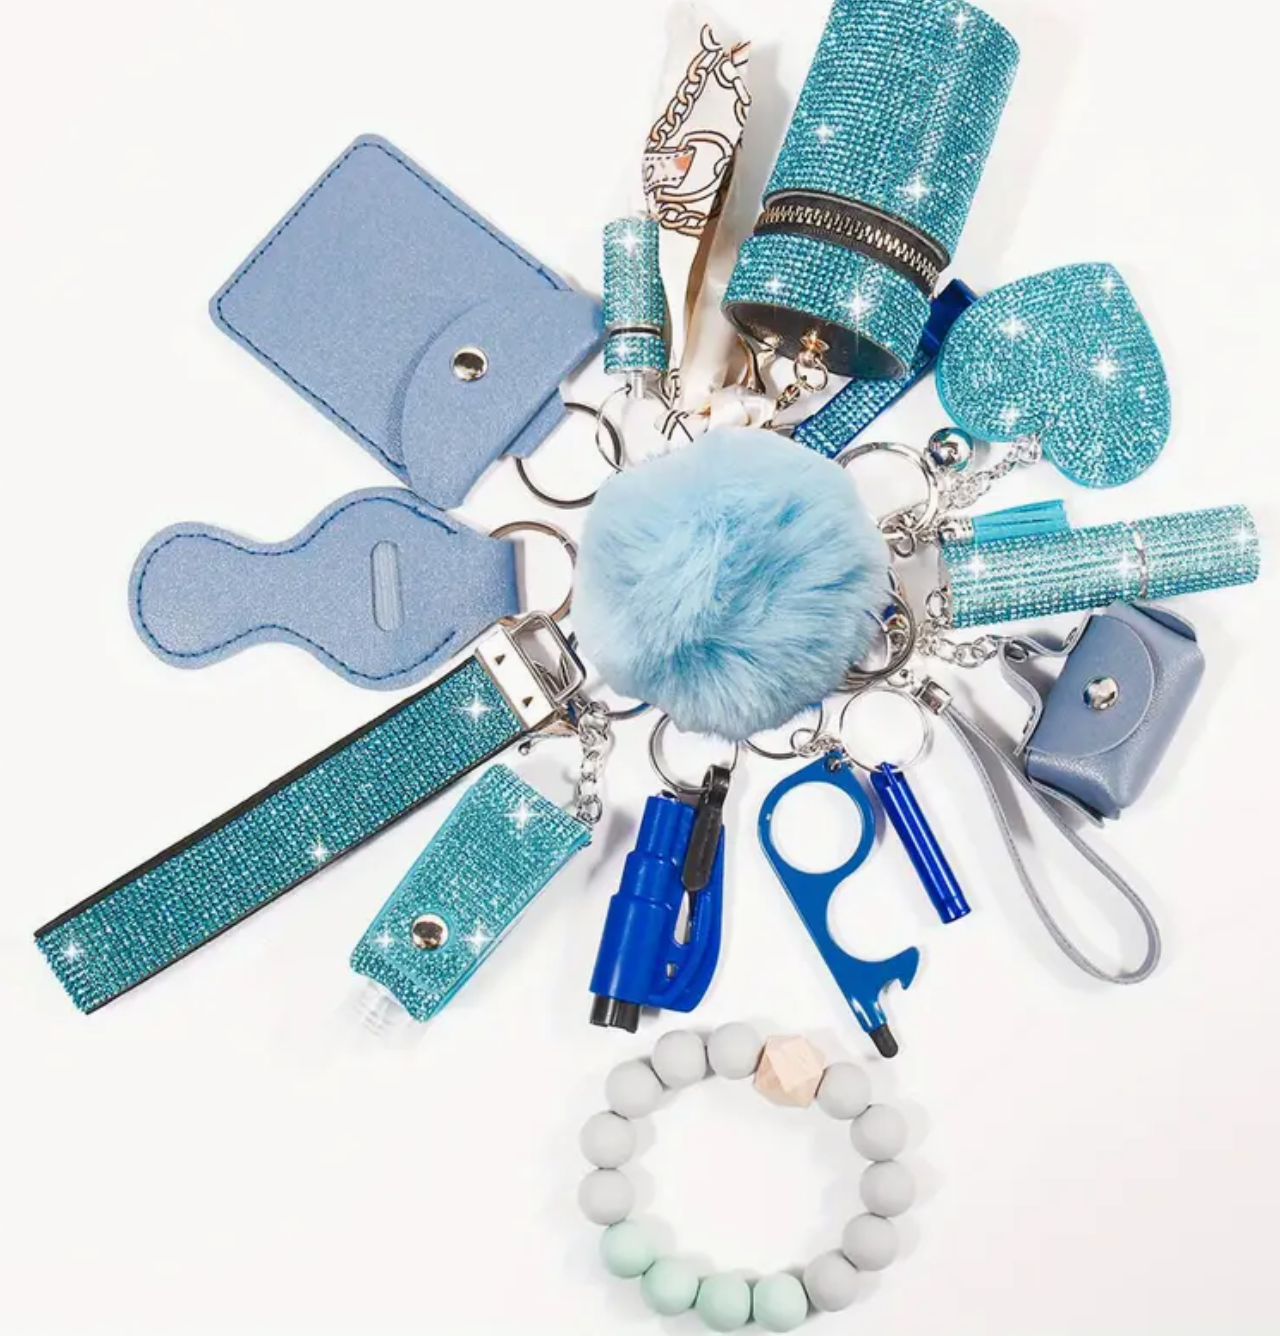 Fashion Bling Keychain Sets 15pcs (Different Styles)